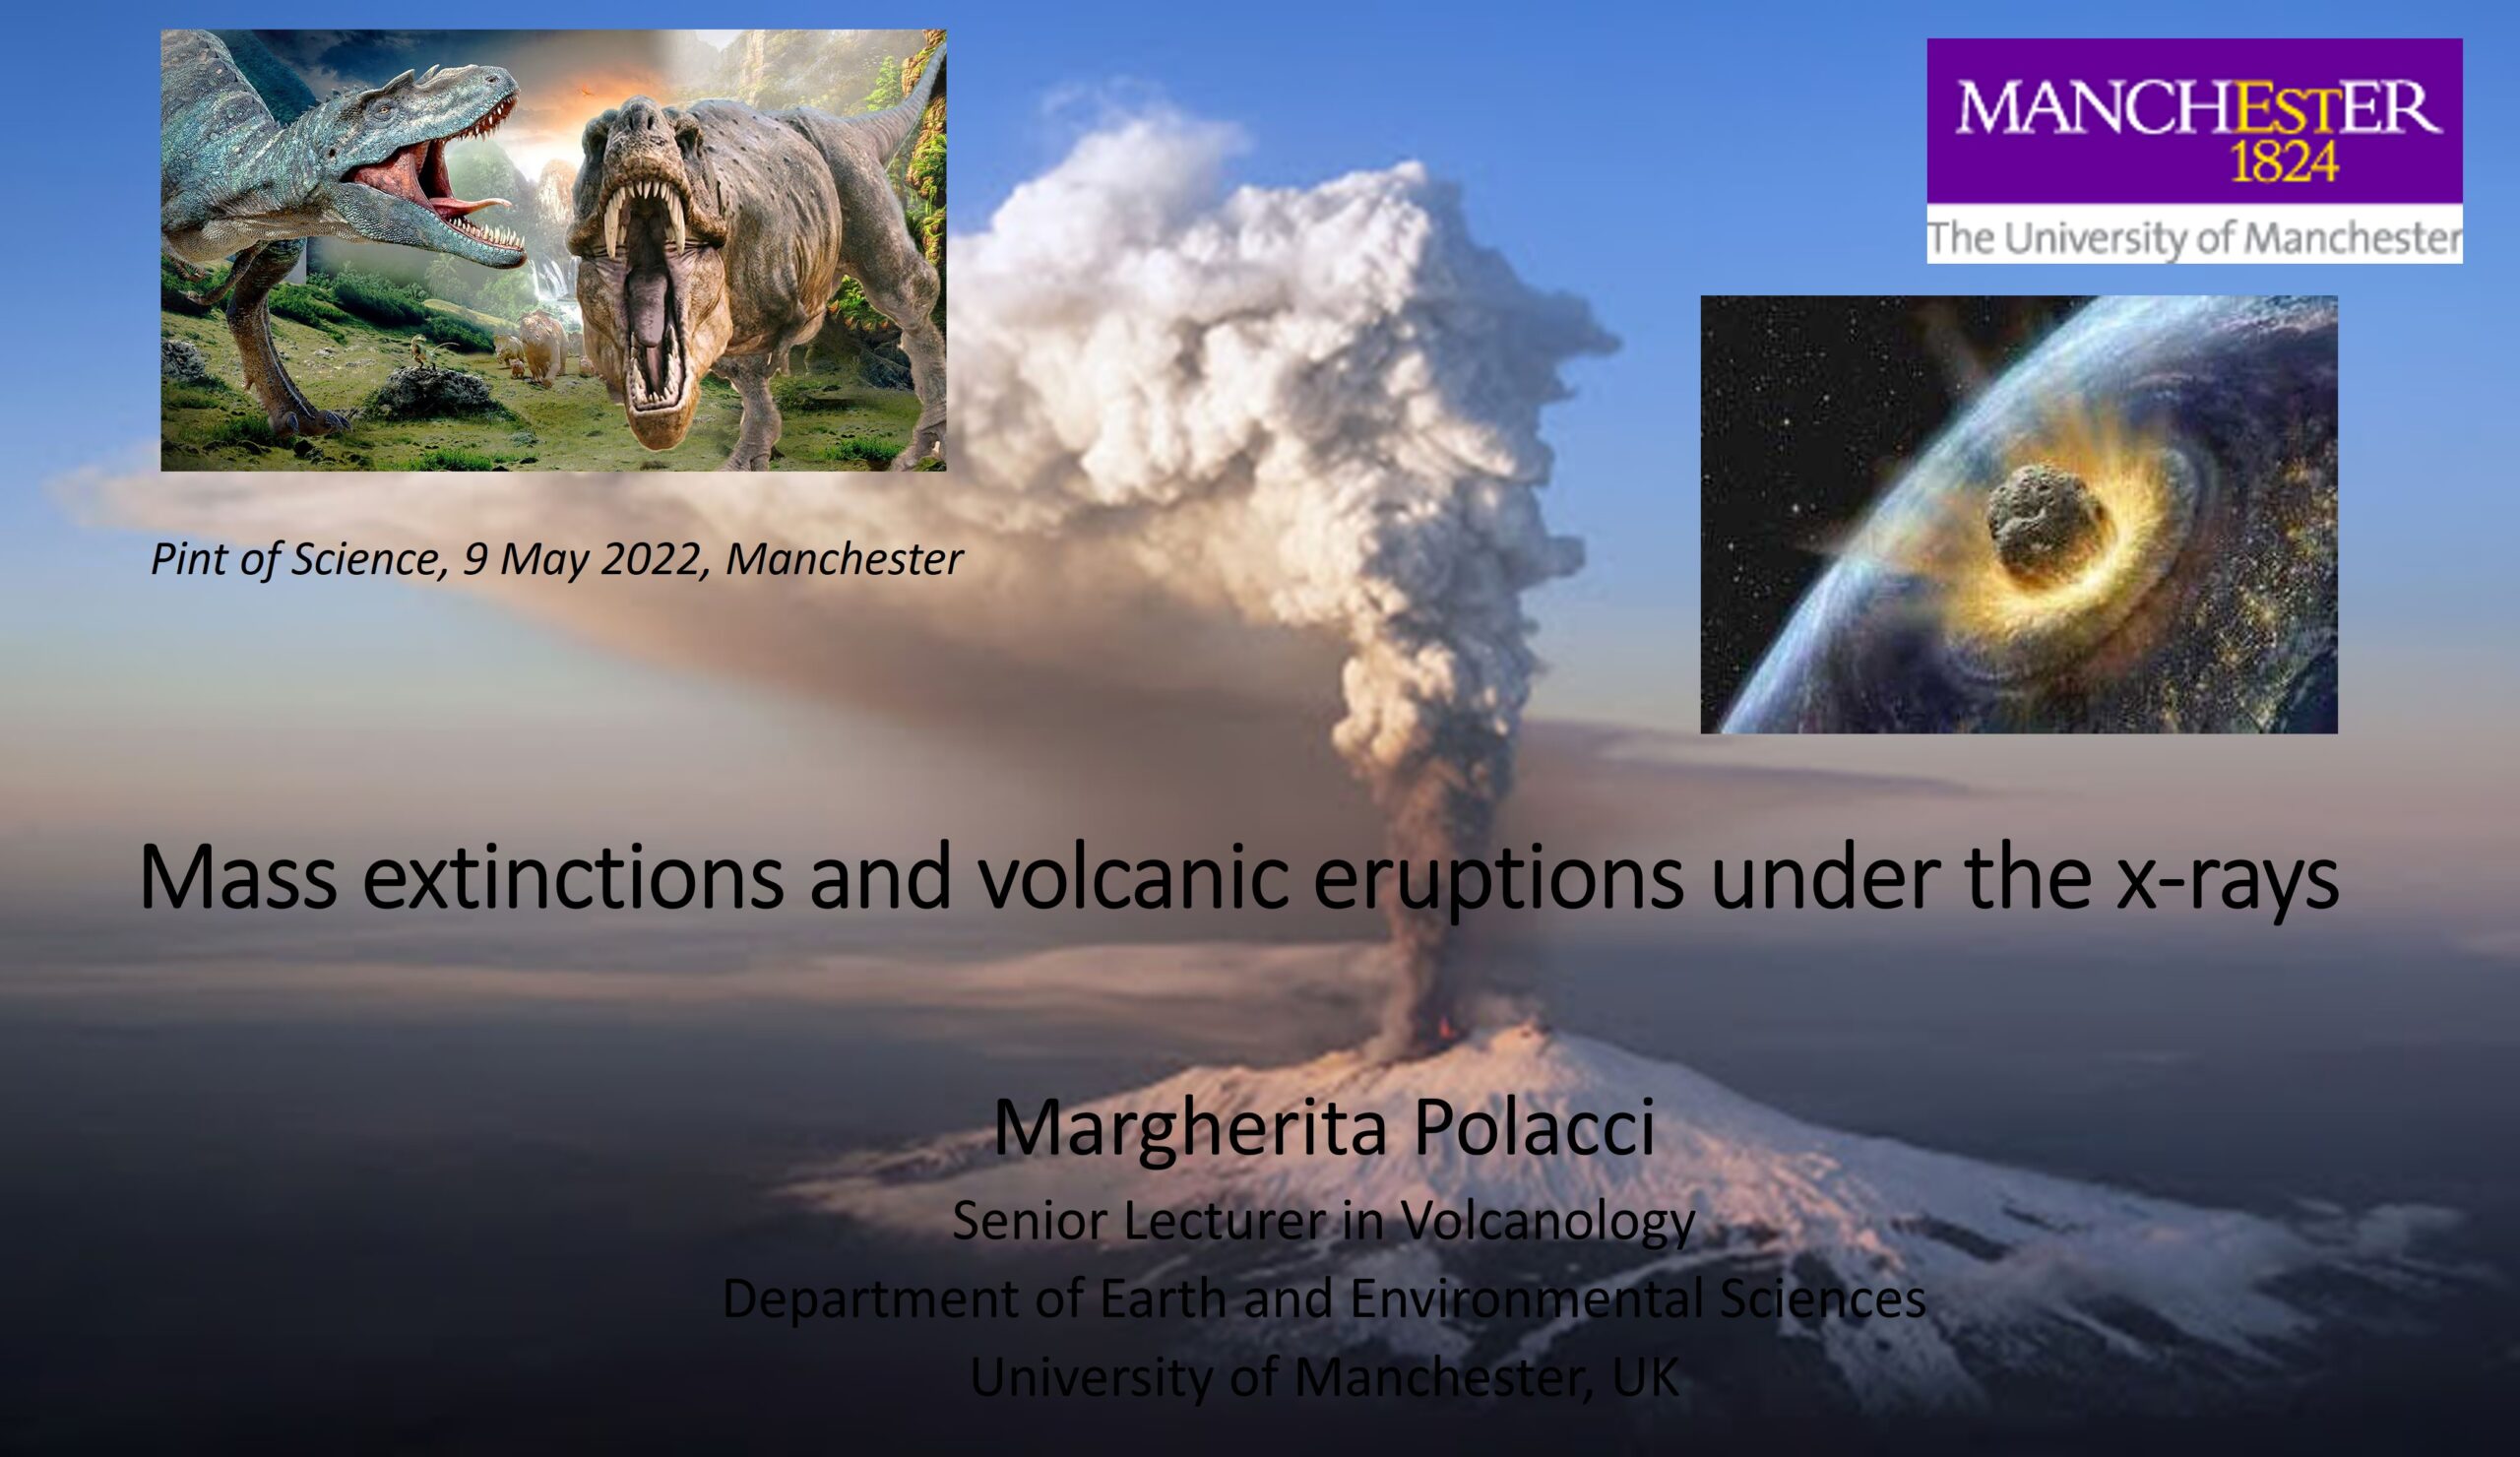 Margherita Polacci's explosive slides for Pint's "The Rumbling Earth" event in Manchester..